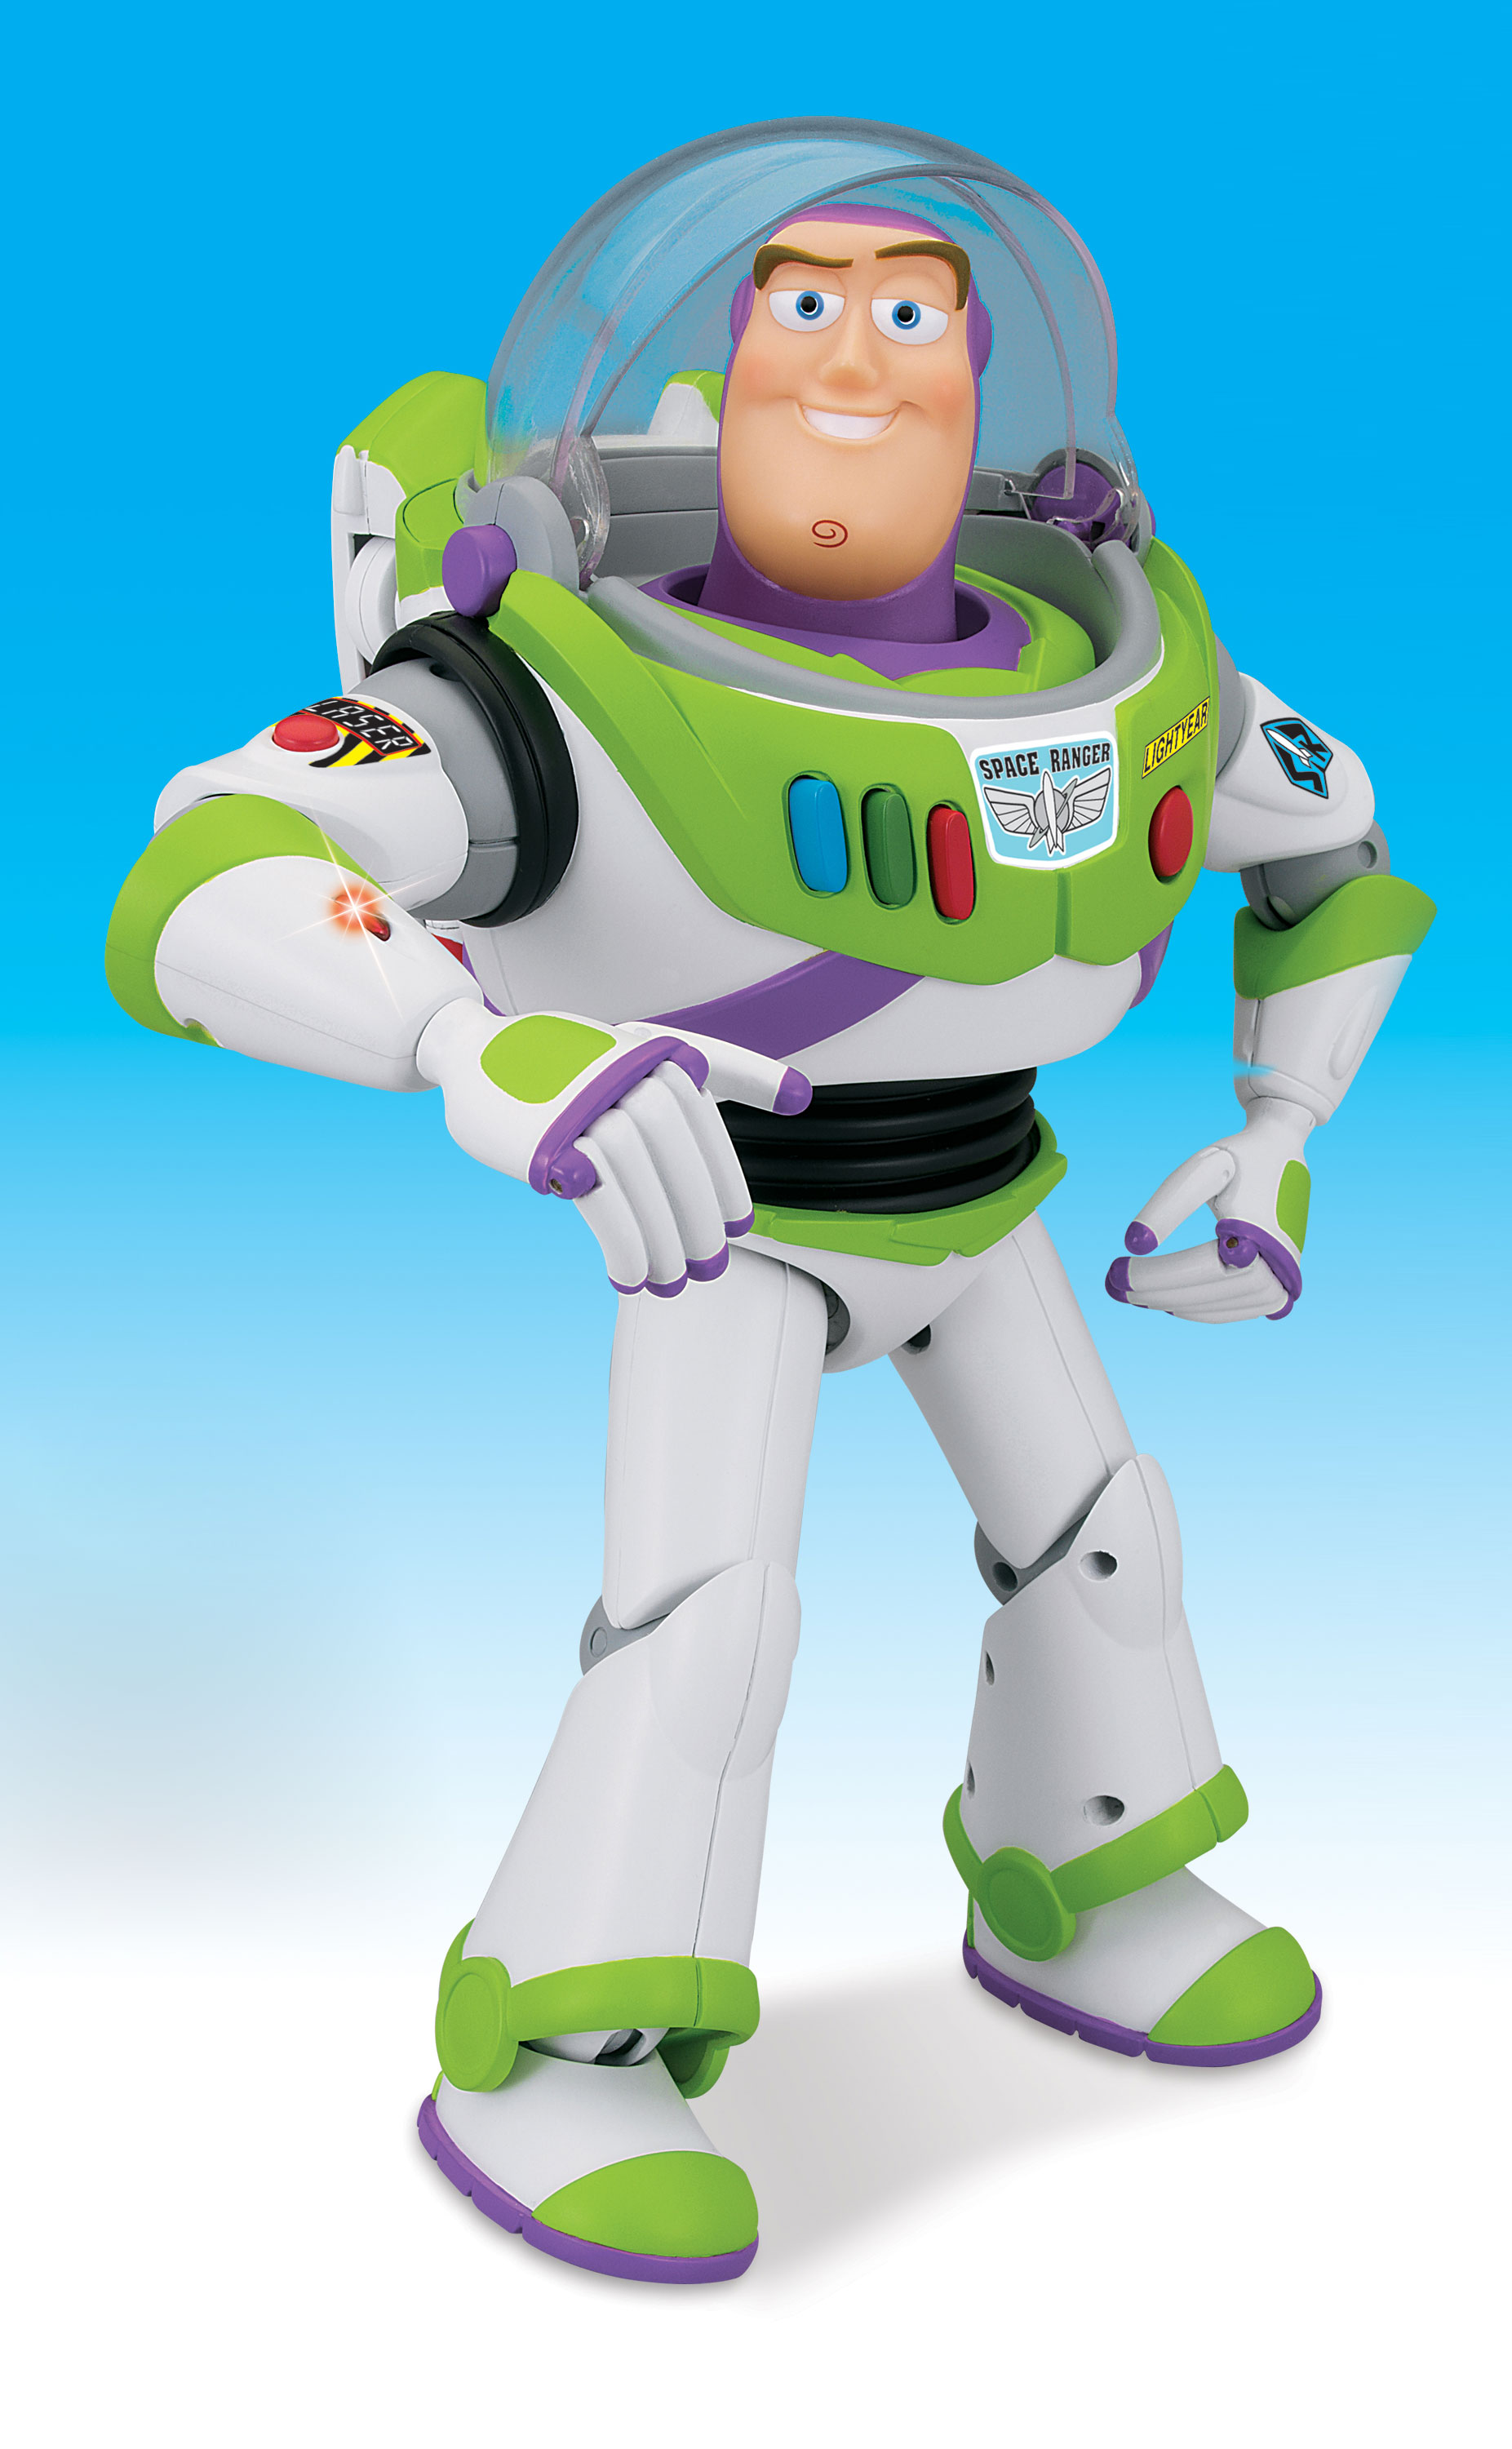 12 Buzz Lightyear Is Straight Out Of The Movie - Buzz De Toy Story -  1853x3001 Wallpaper - teahub.io